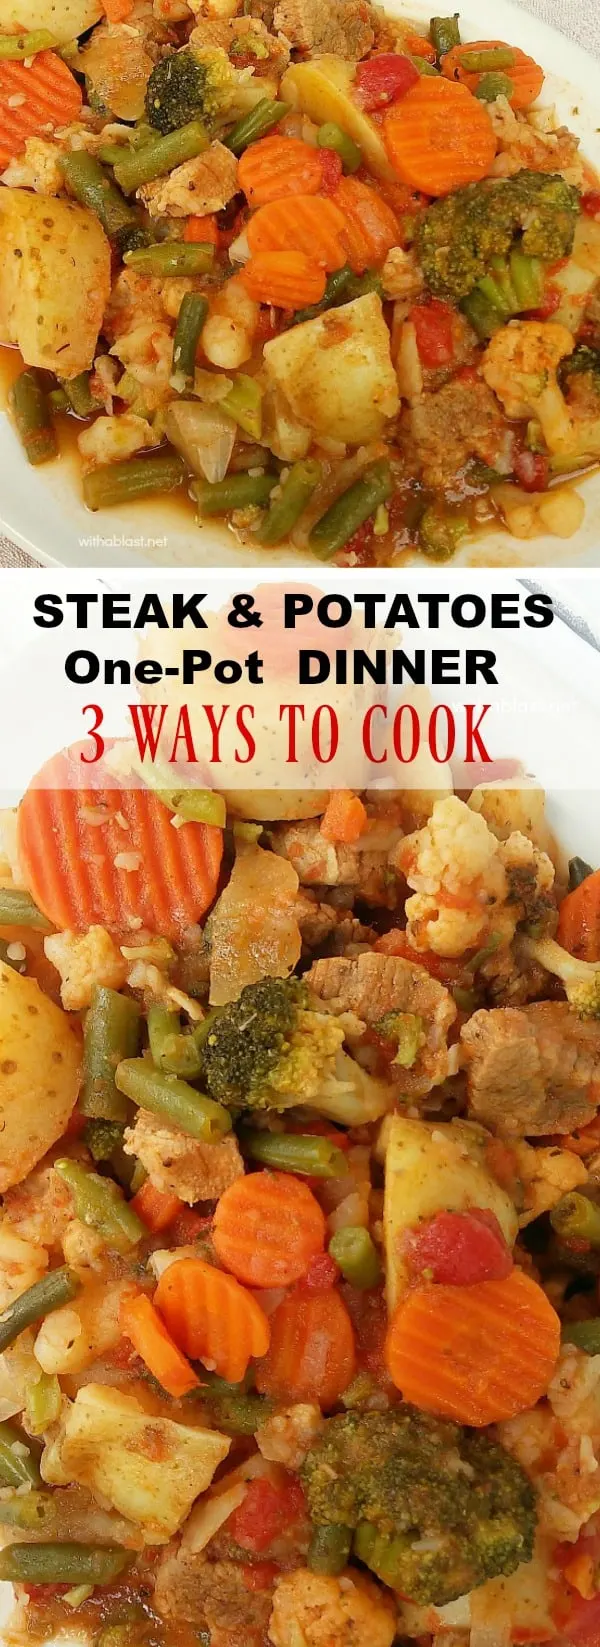 Steak and Potatoes Dinner is an easy one-pot meal, which can be made using any of three methods - Loaded with meat and vegetables this is perfect comfort food #OnePotDinner #OnePotMeals #SteakAndPotatoes #ComfortFood